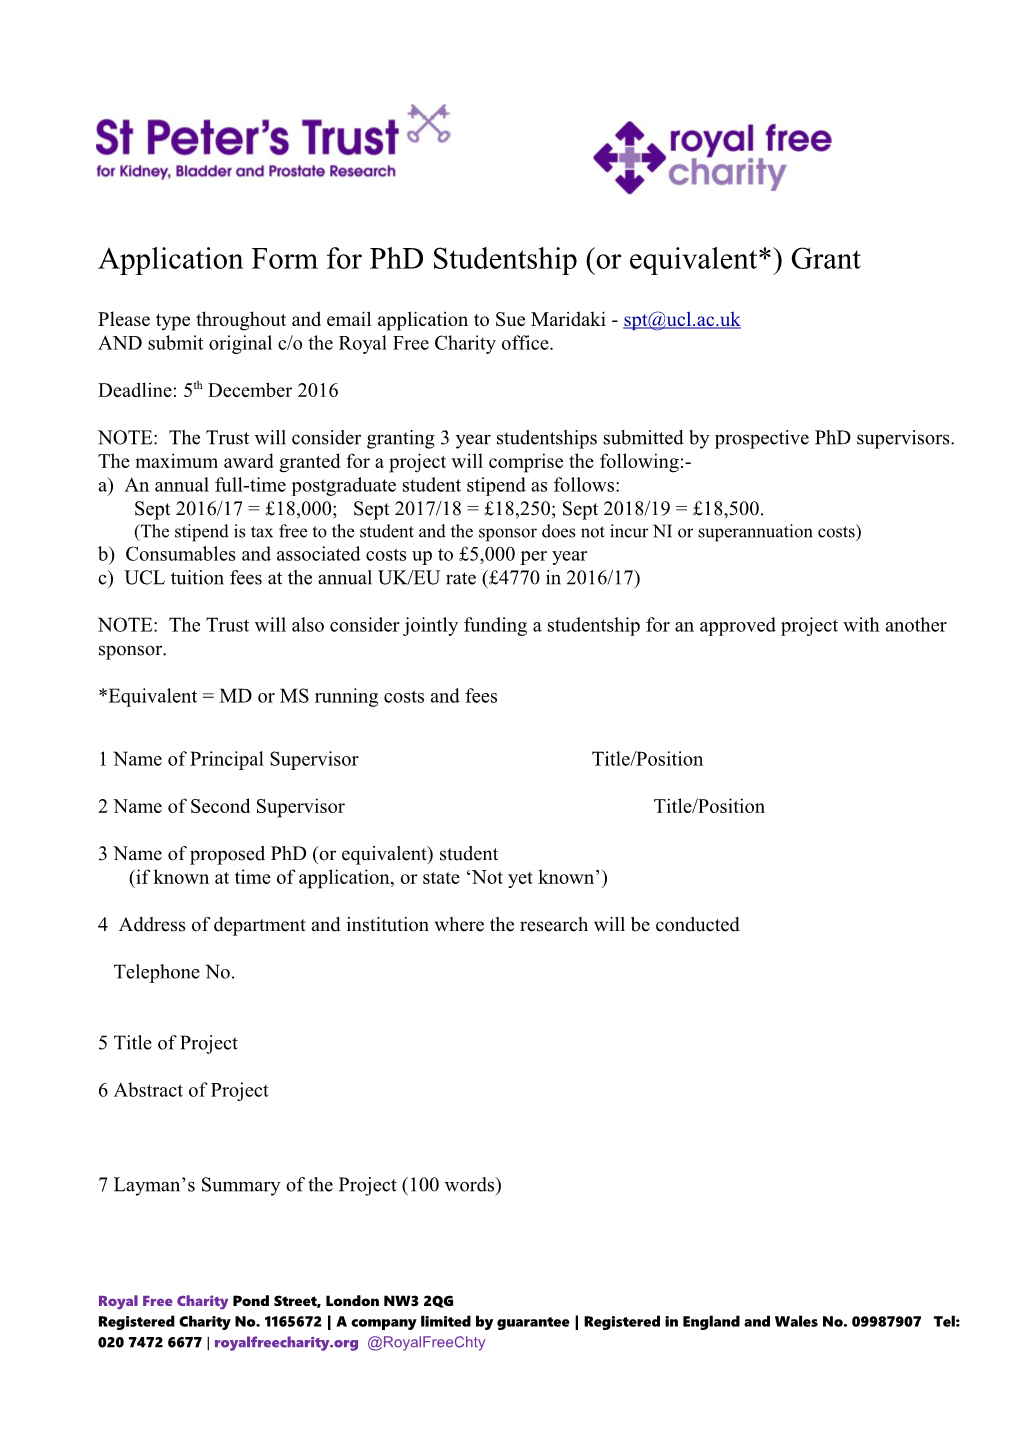 Application Form for Phd Studentship (Or Equivalent*) Grant